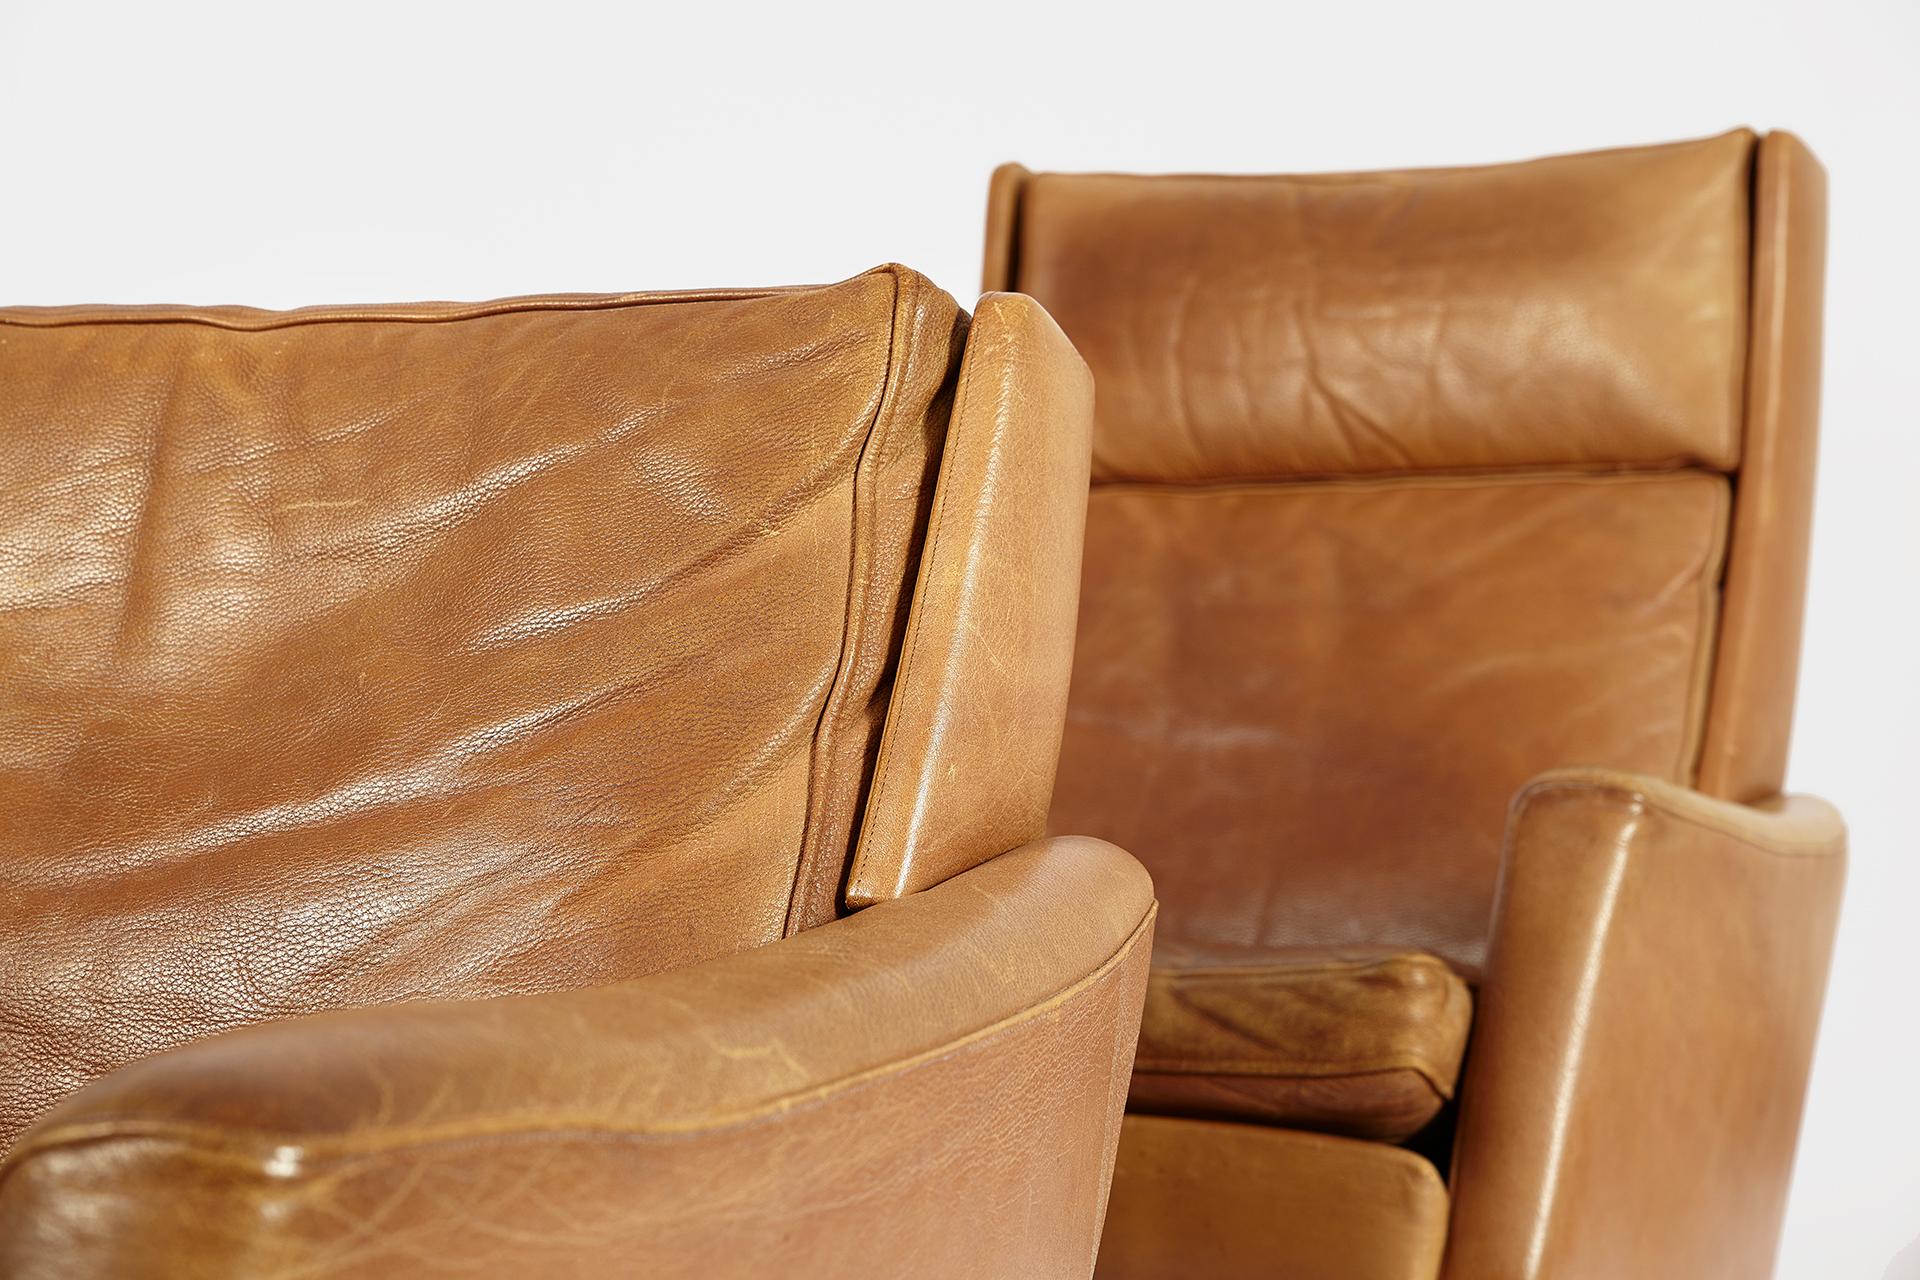 Set of two matching Danish midcentury lounge chairs of caramell-brown leather featuring strong elegant lines and high comfort. The swivel chairs have high quality grained leather upholstery with beautiful patina.